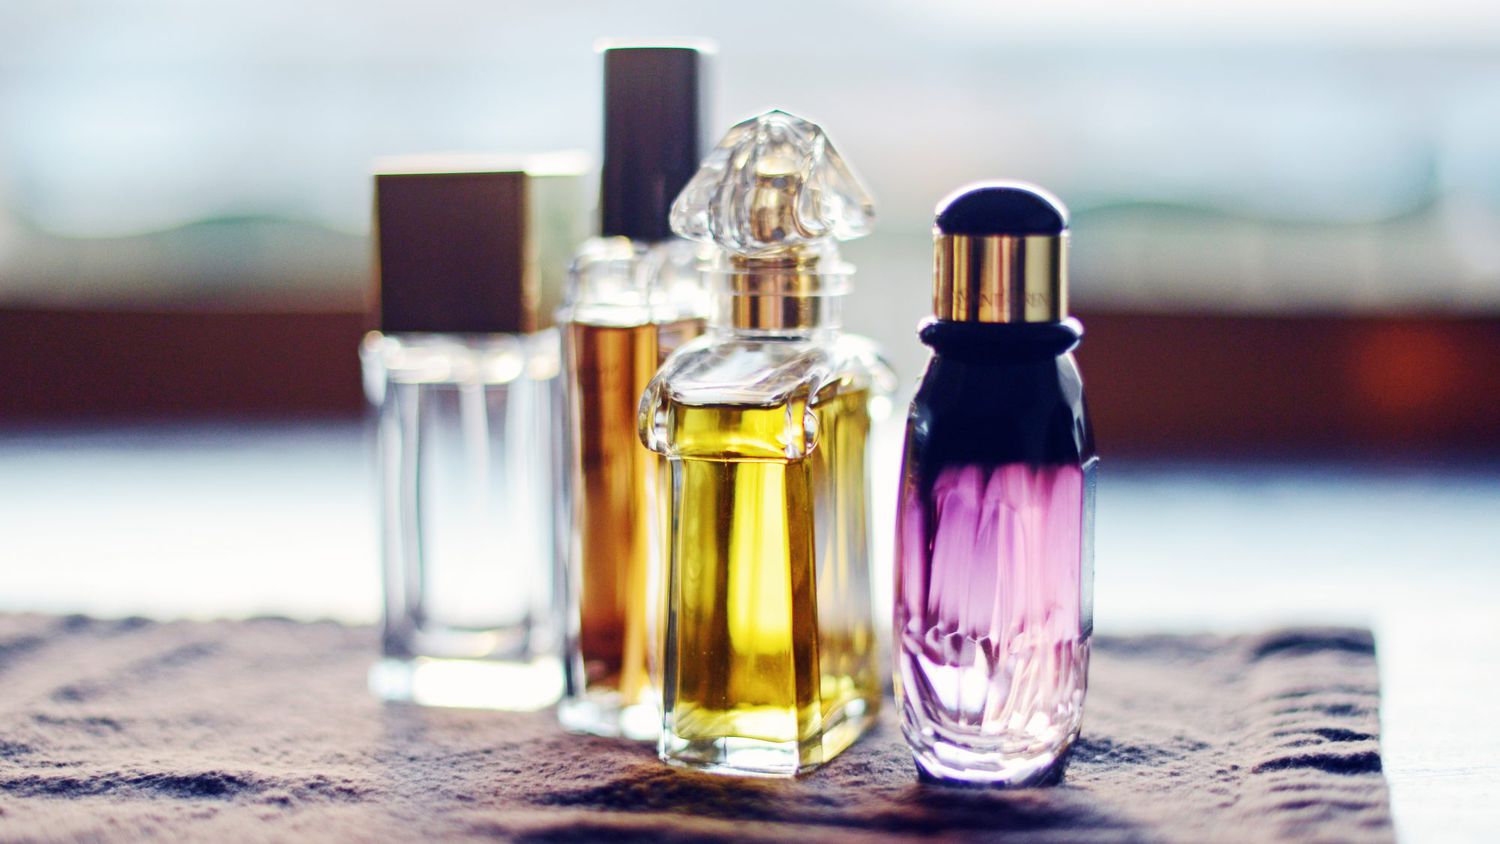 These Byredo Perfumes Are Worth the Money